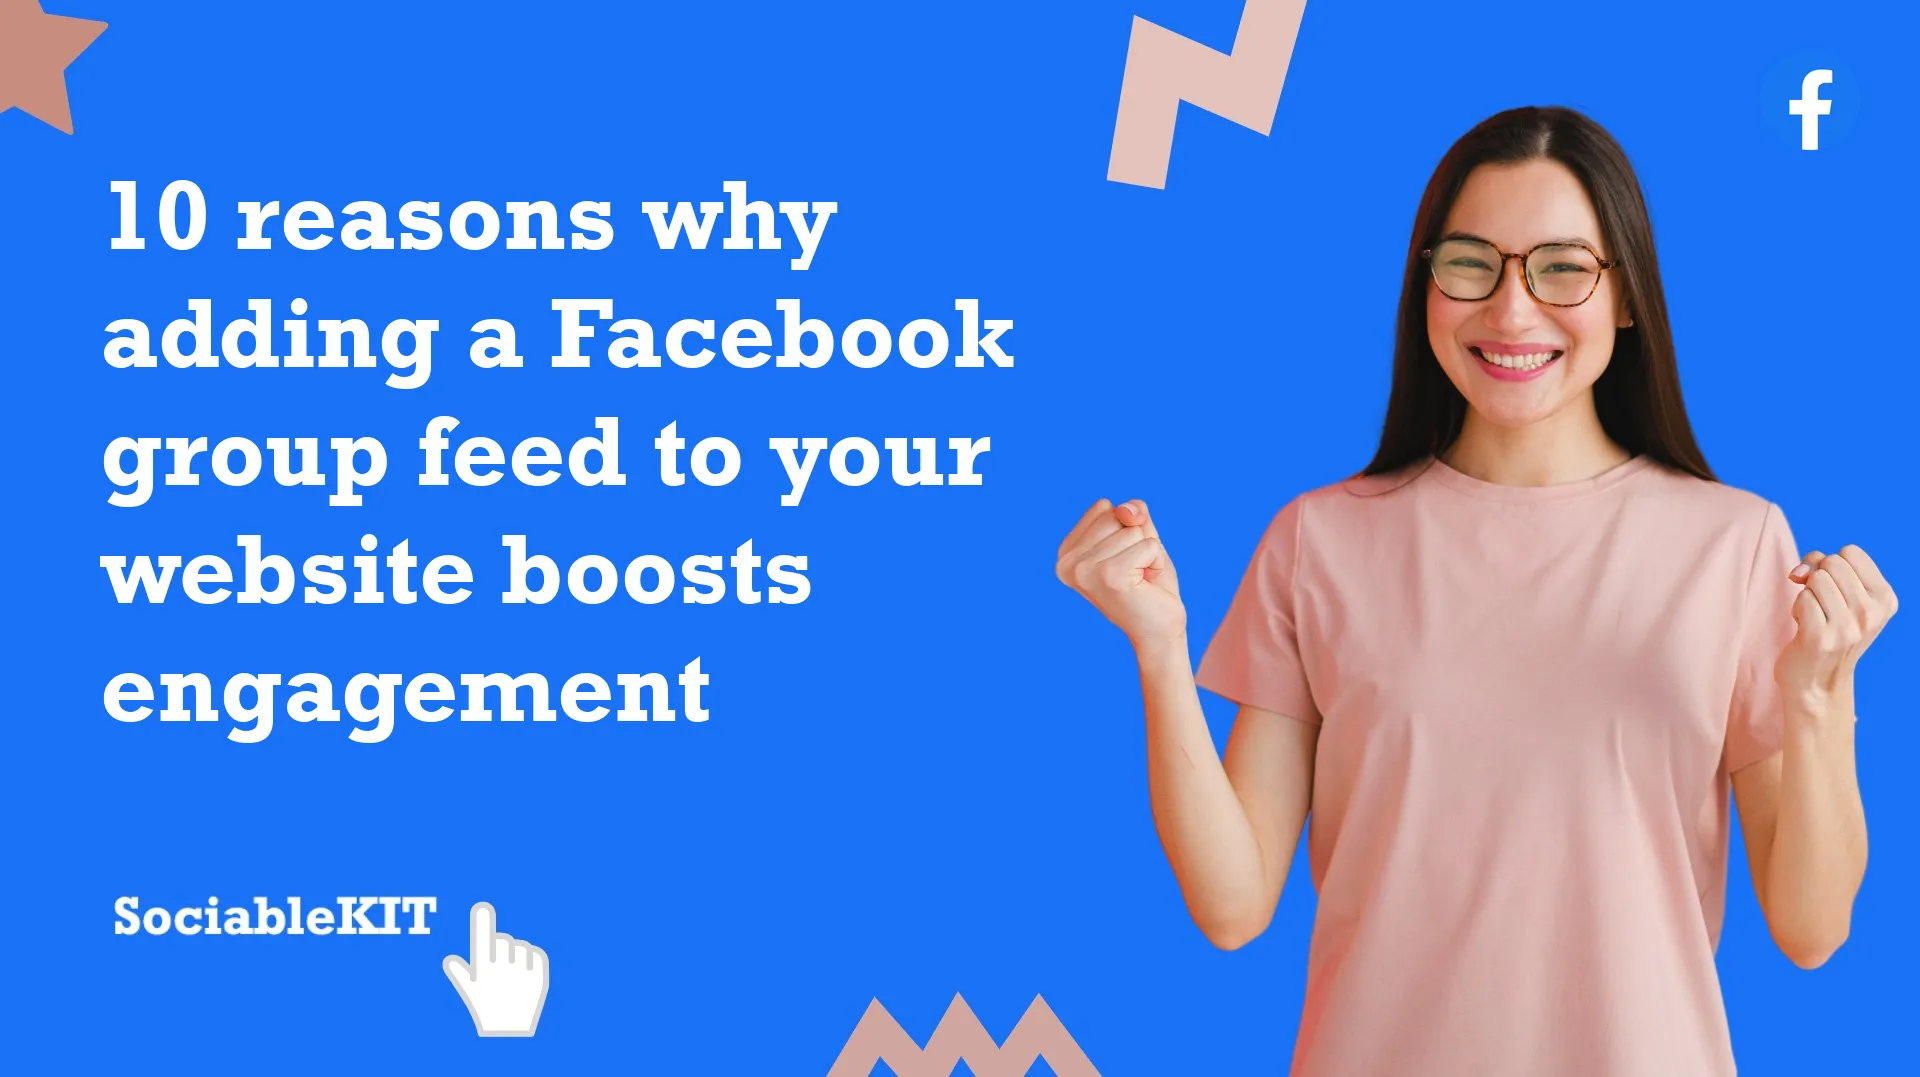 10 reasons why adding a Facebook group feed to your website boosts engagement